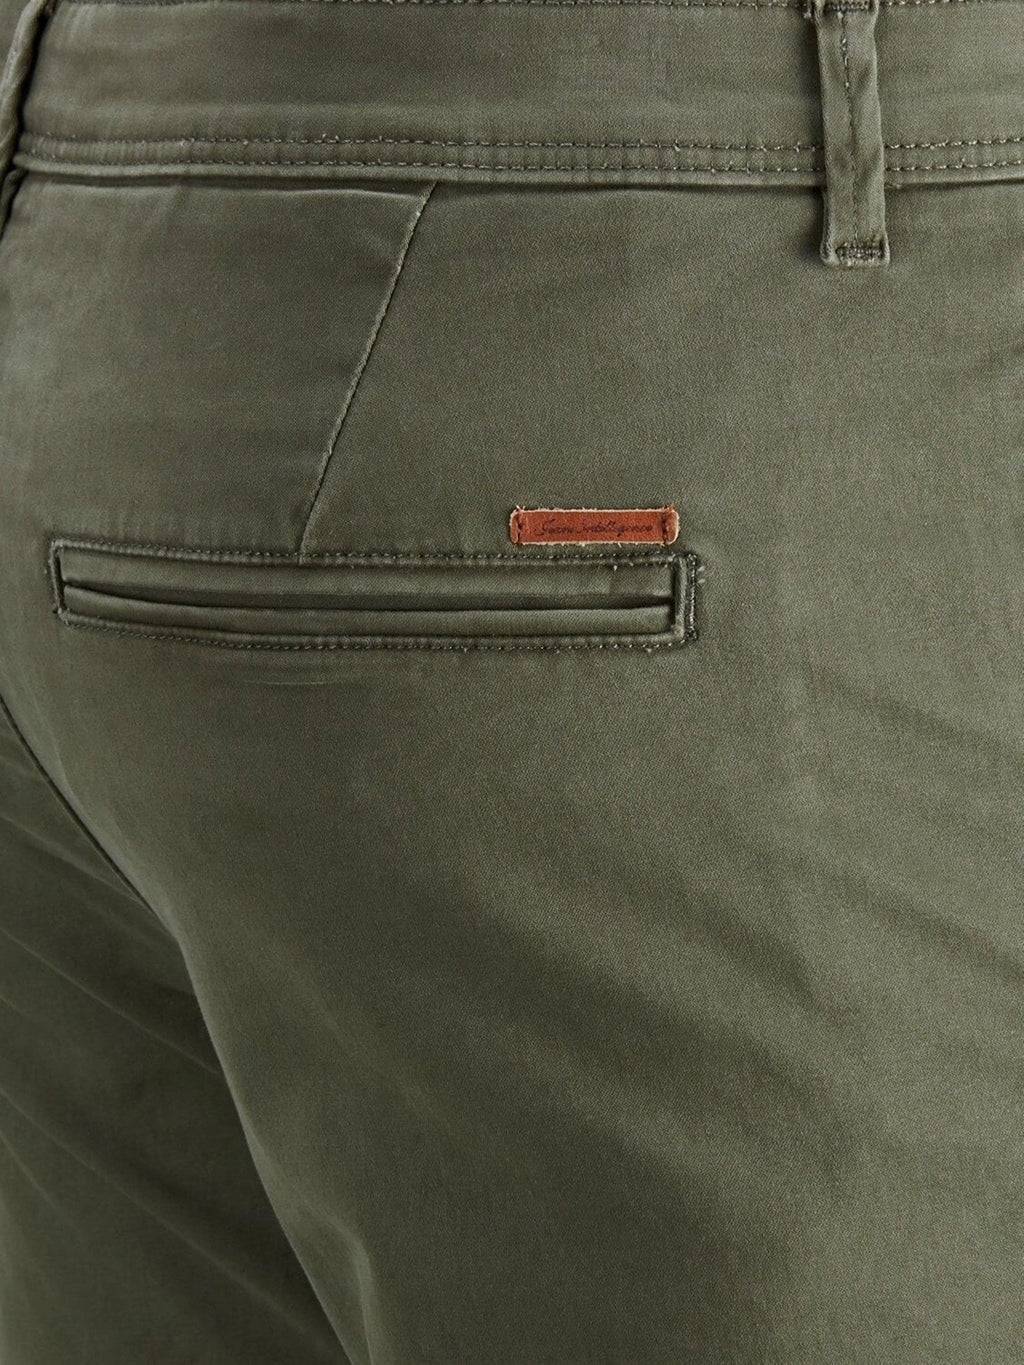 Marco Bowie Chino Hosen - Olive